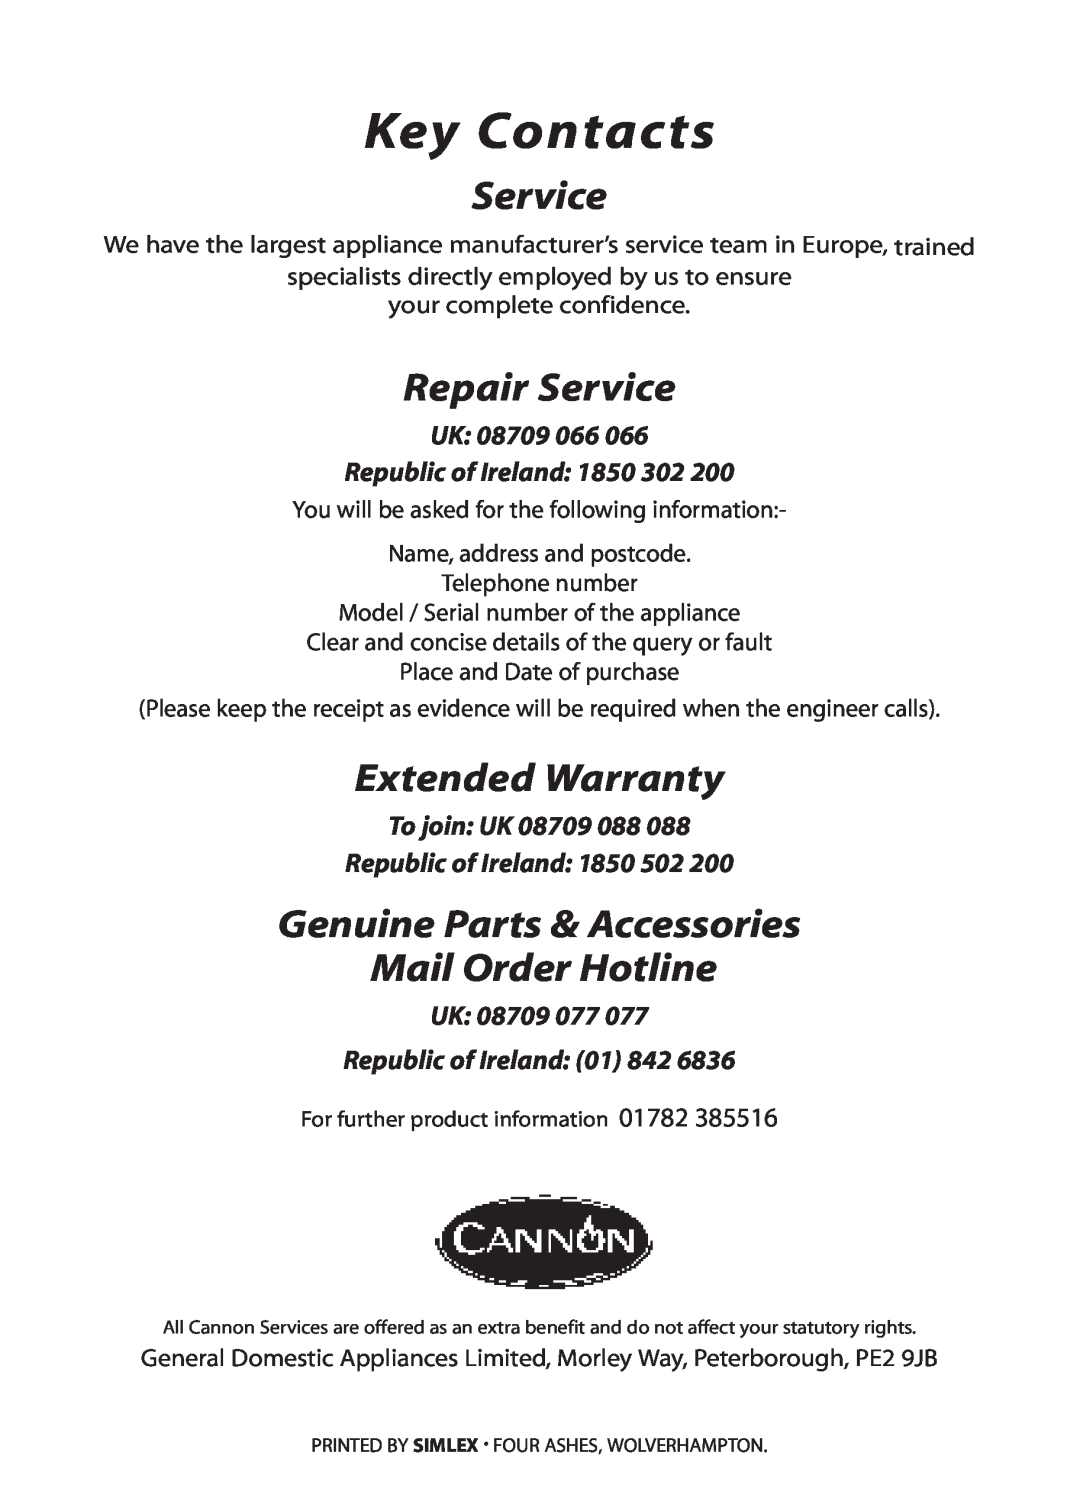 Cannon 10538G MK2 Key Contacts, Repair Service, Extended Warranty, Genuine Parts & Accessories Mail Order Hotline 